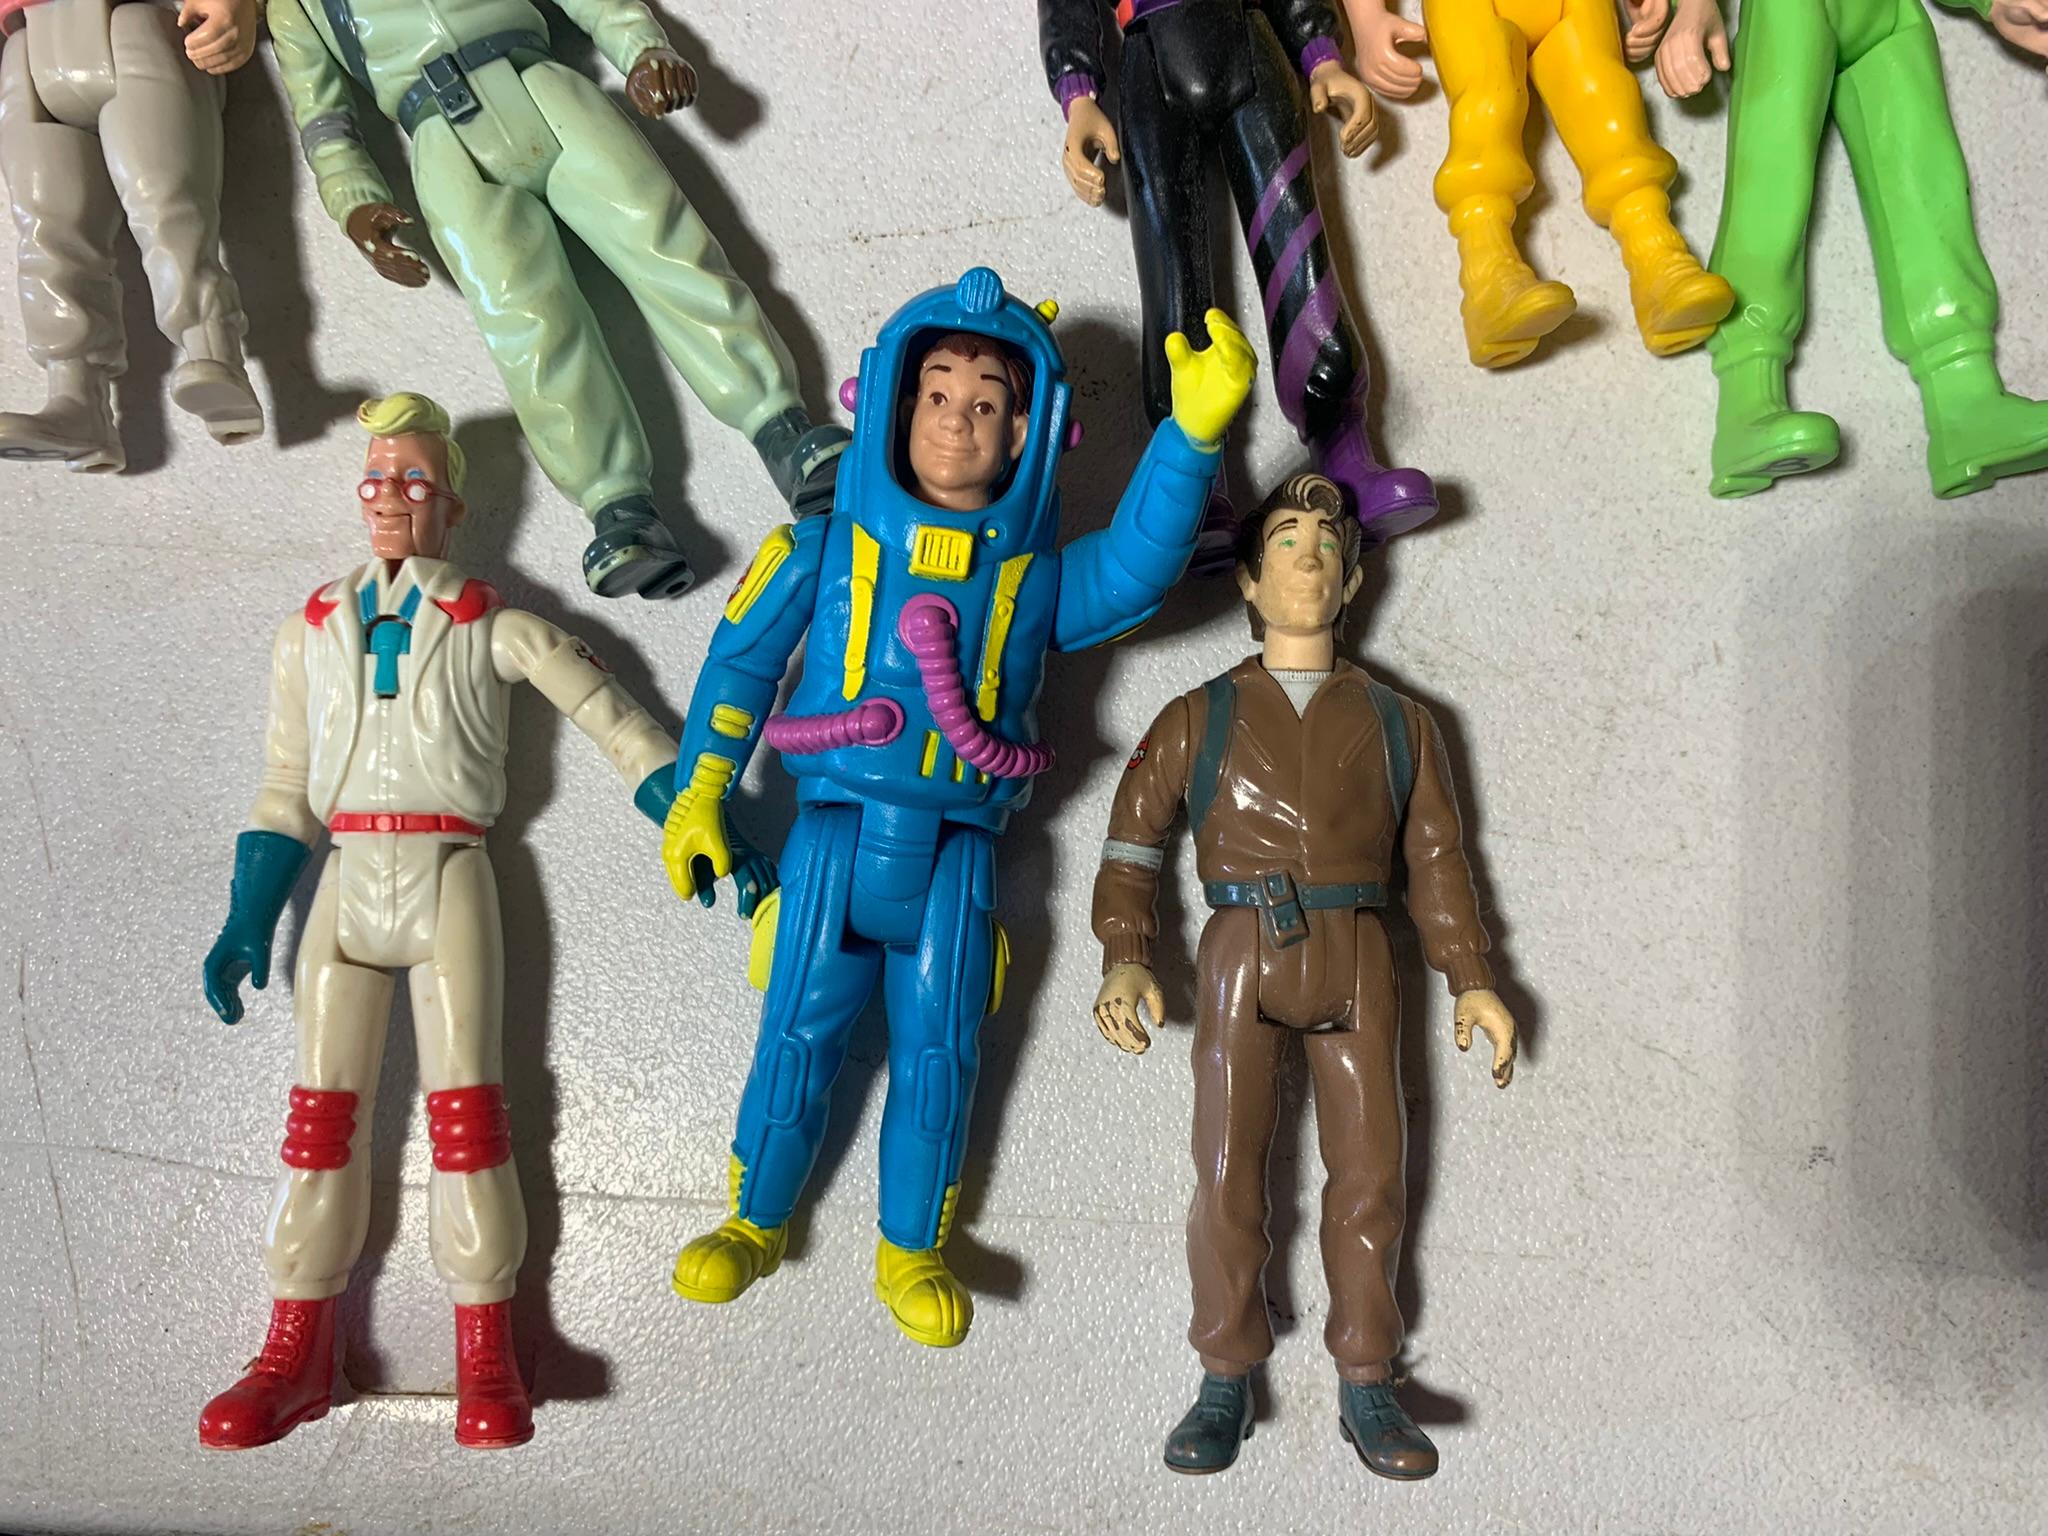 Great Group of Vintage Ghostbuster Toys